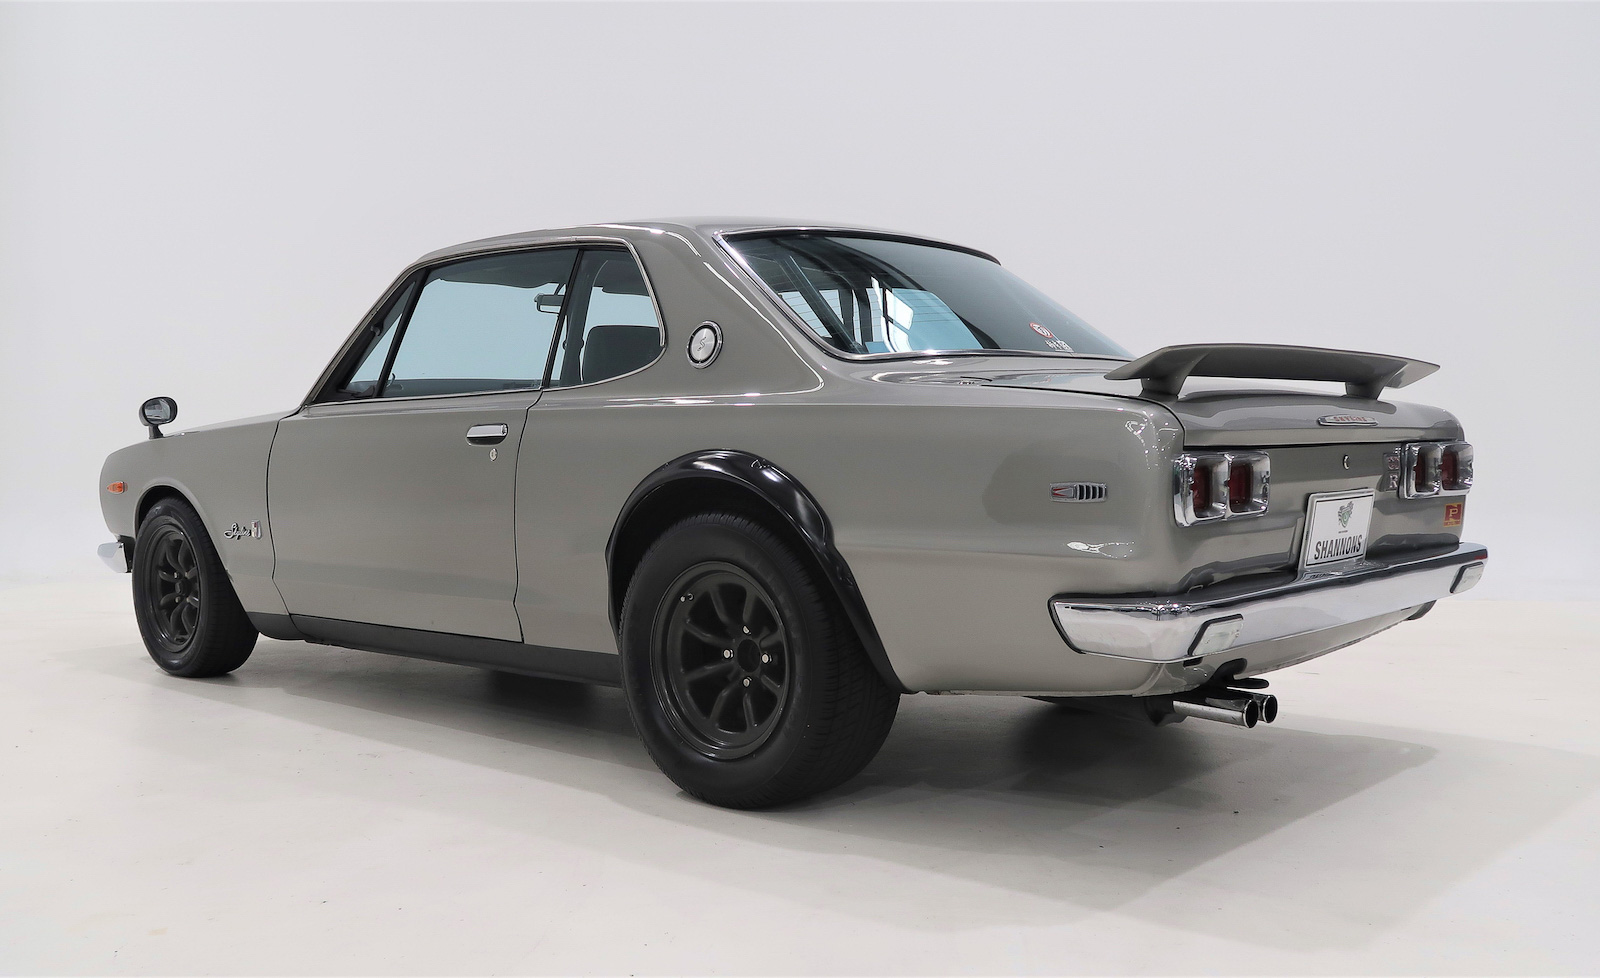 3 iconic Nissan GT-Rs up for auction, including classic Hakosuka replica